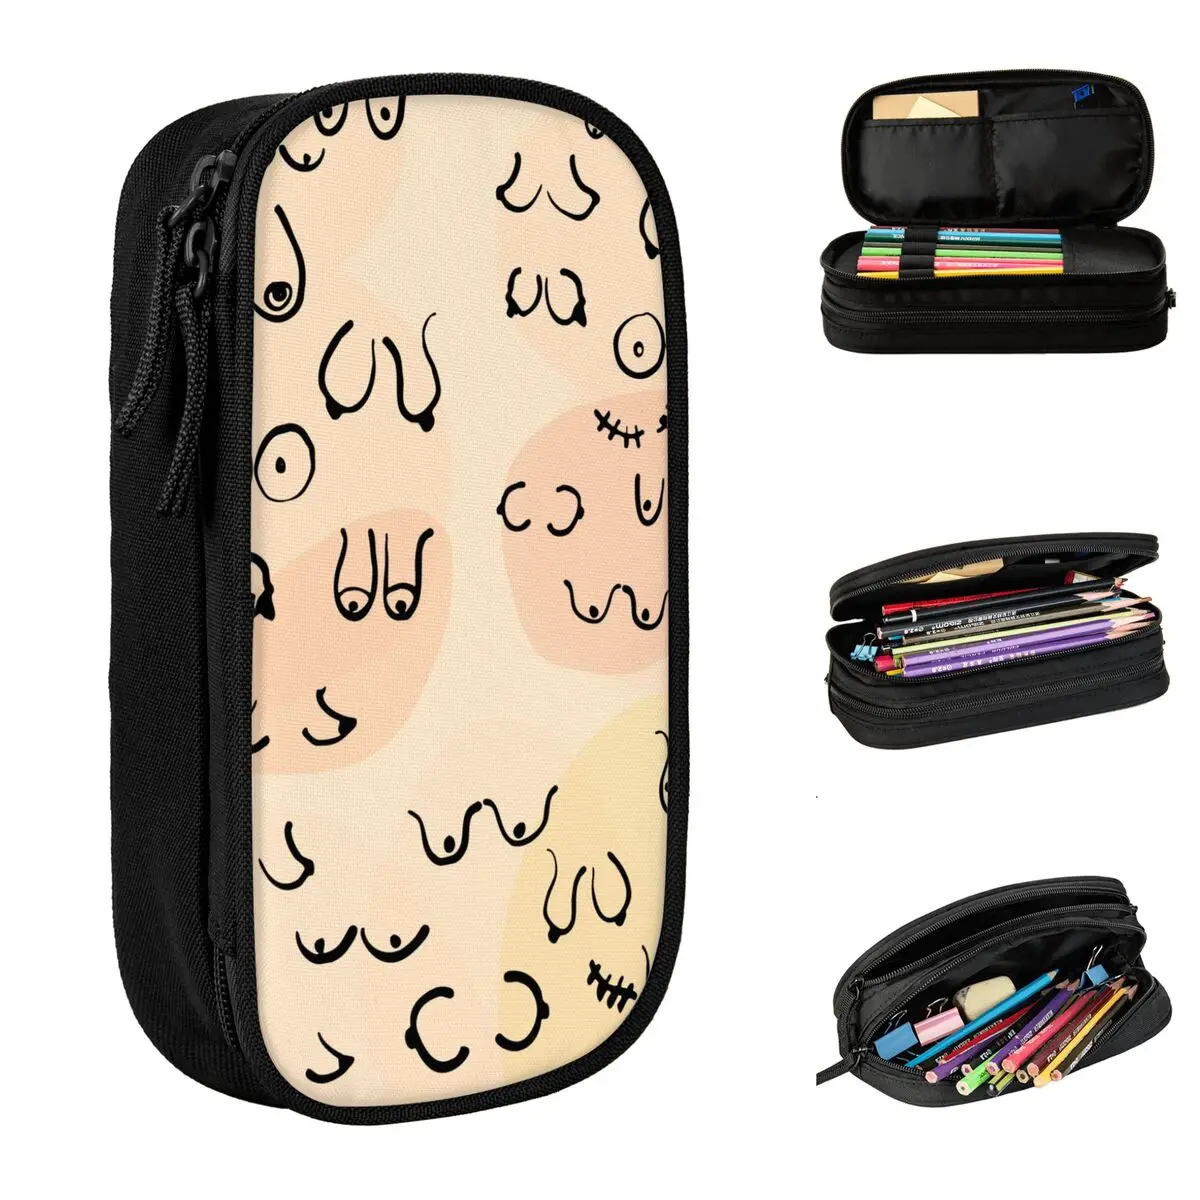 

Mid Century Boobies Pencil Case Fashion Boobs Pattern Pen Box Pencil Bags Girls Boys Storage Students School Gifts Pencilcases